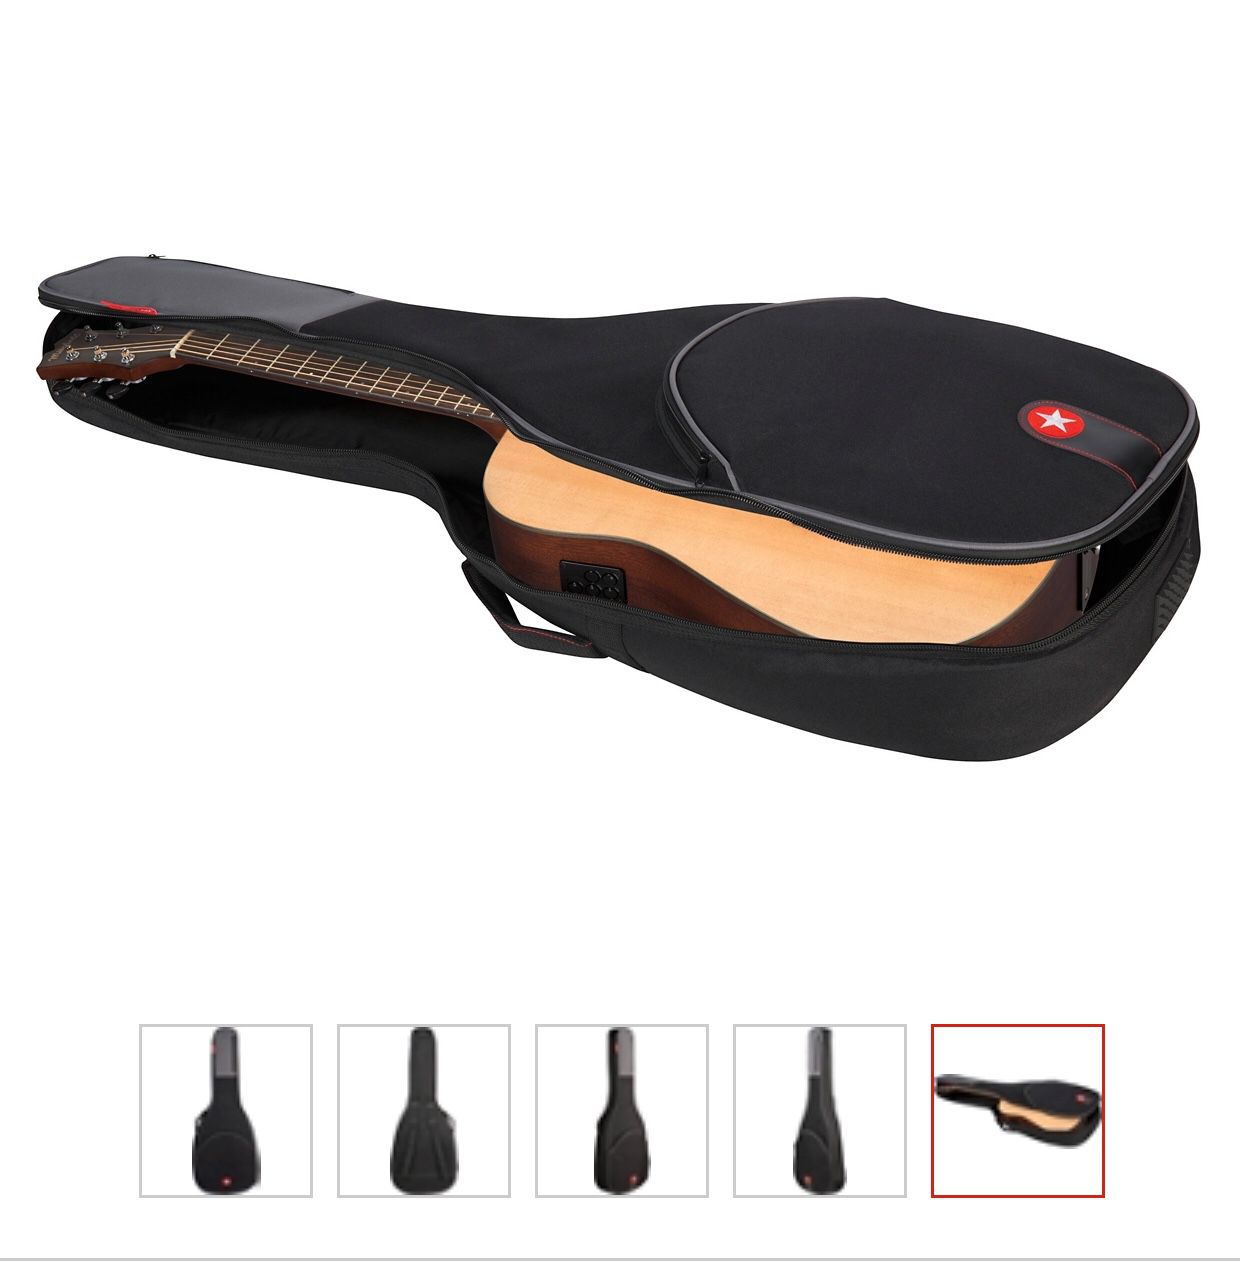 Acoustic Guitar Gig Bag for sale. Almost brand new. Only used for 2 weeks. Good for regular size guitar.